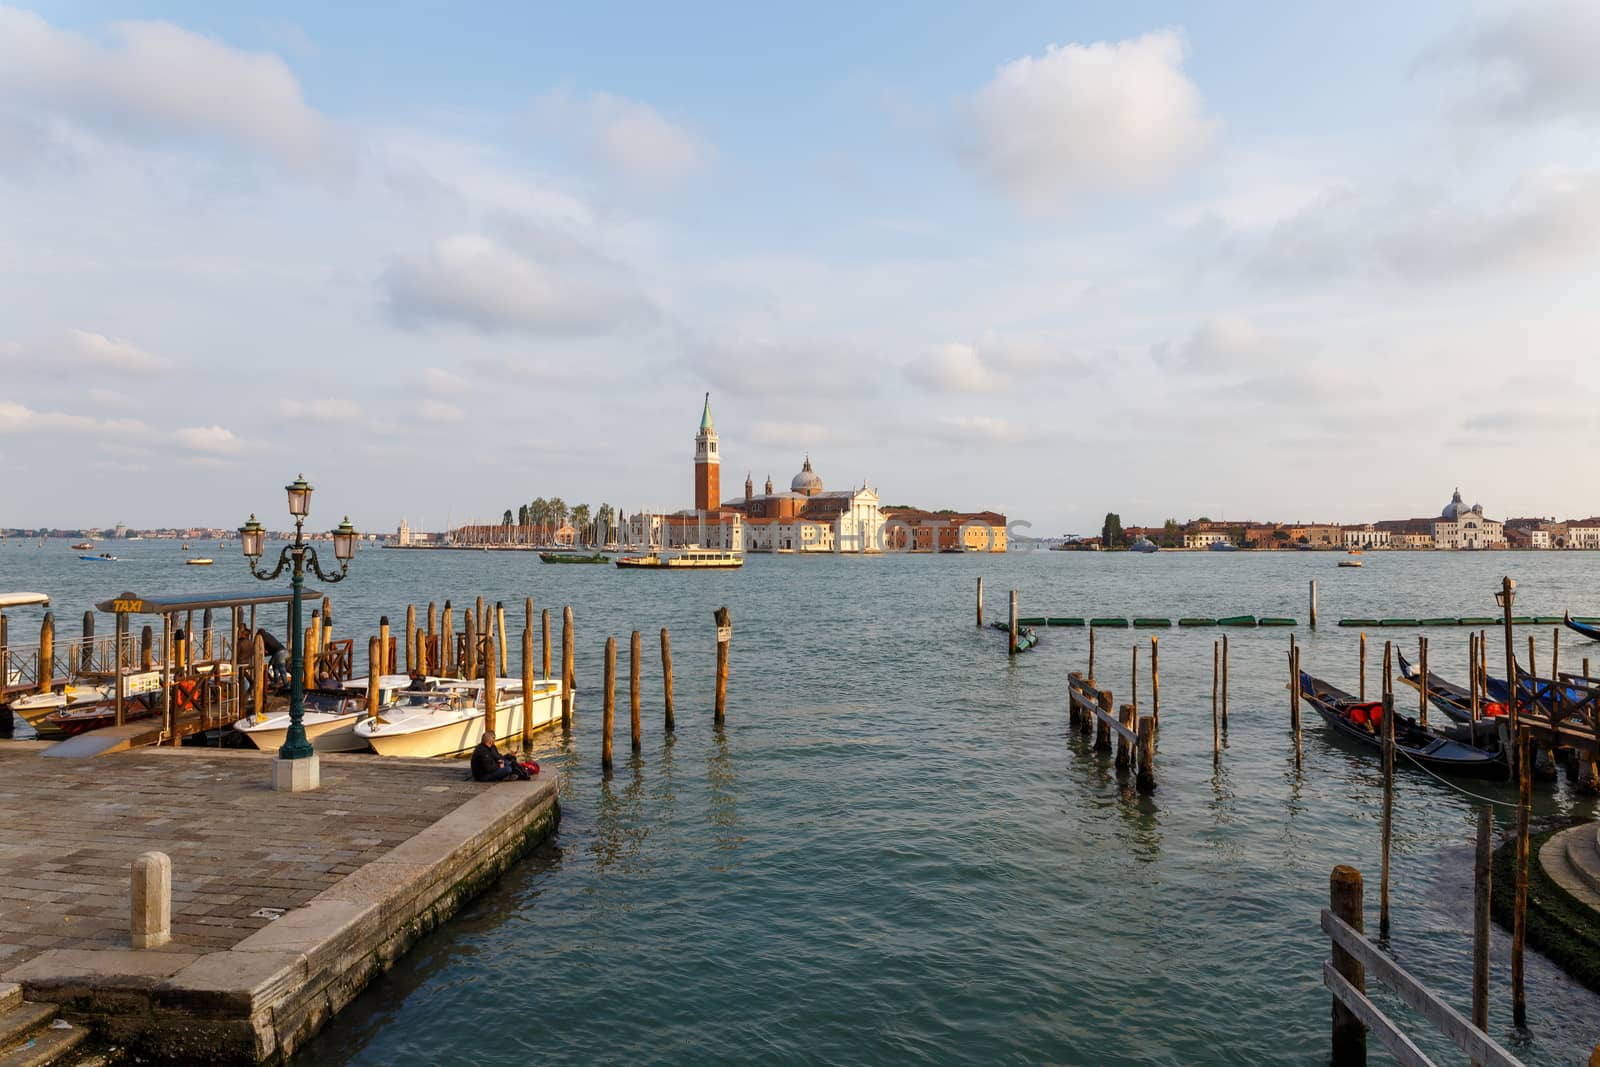 Venice, Italy - CIRCA 2020: View of an empty water canal in Venice Italy. Concept of the effects of lock down due to CoronaVirus COVID-19. Picturesque landscape. by dugulan